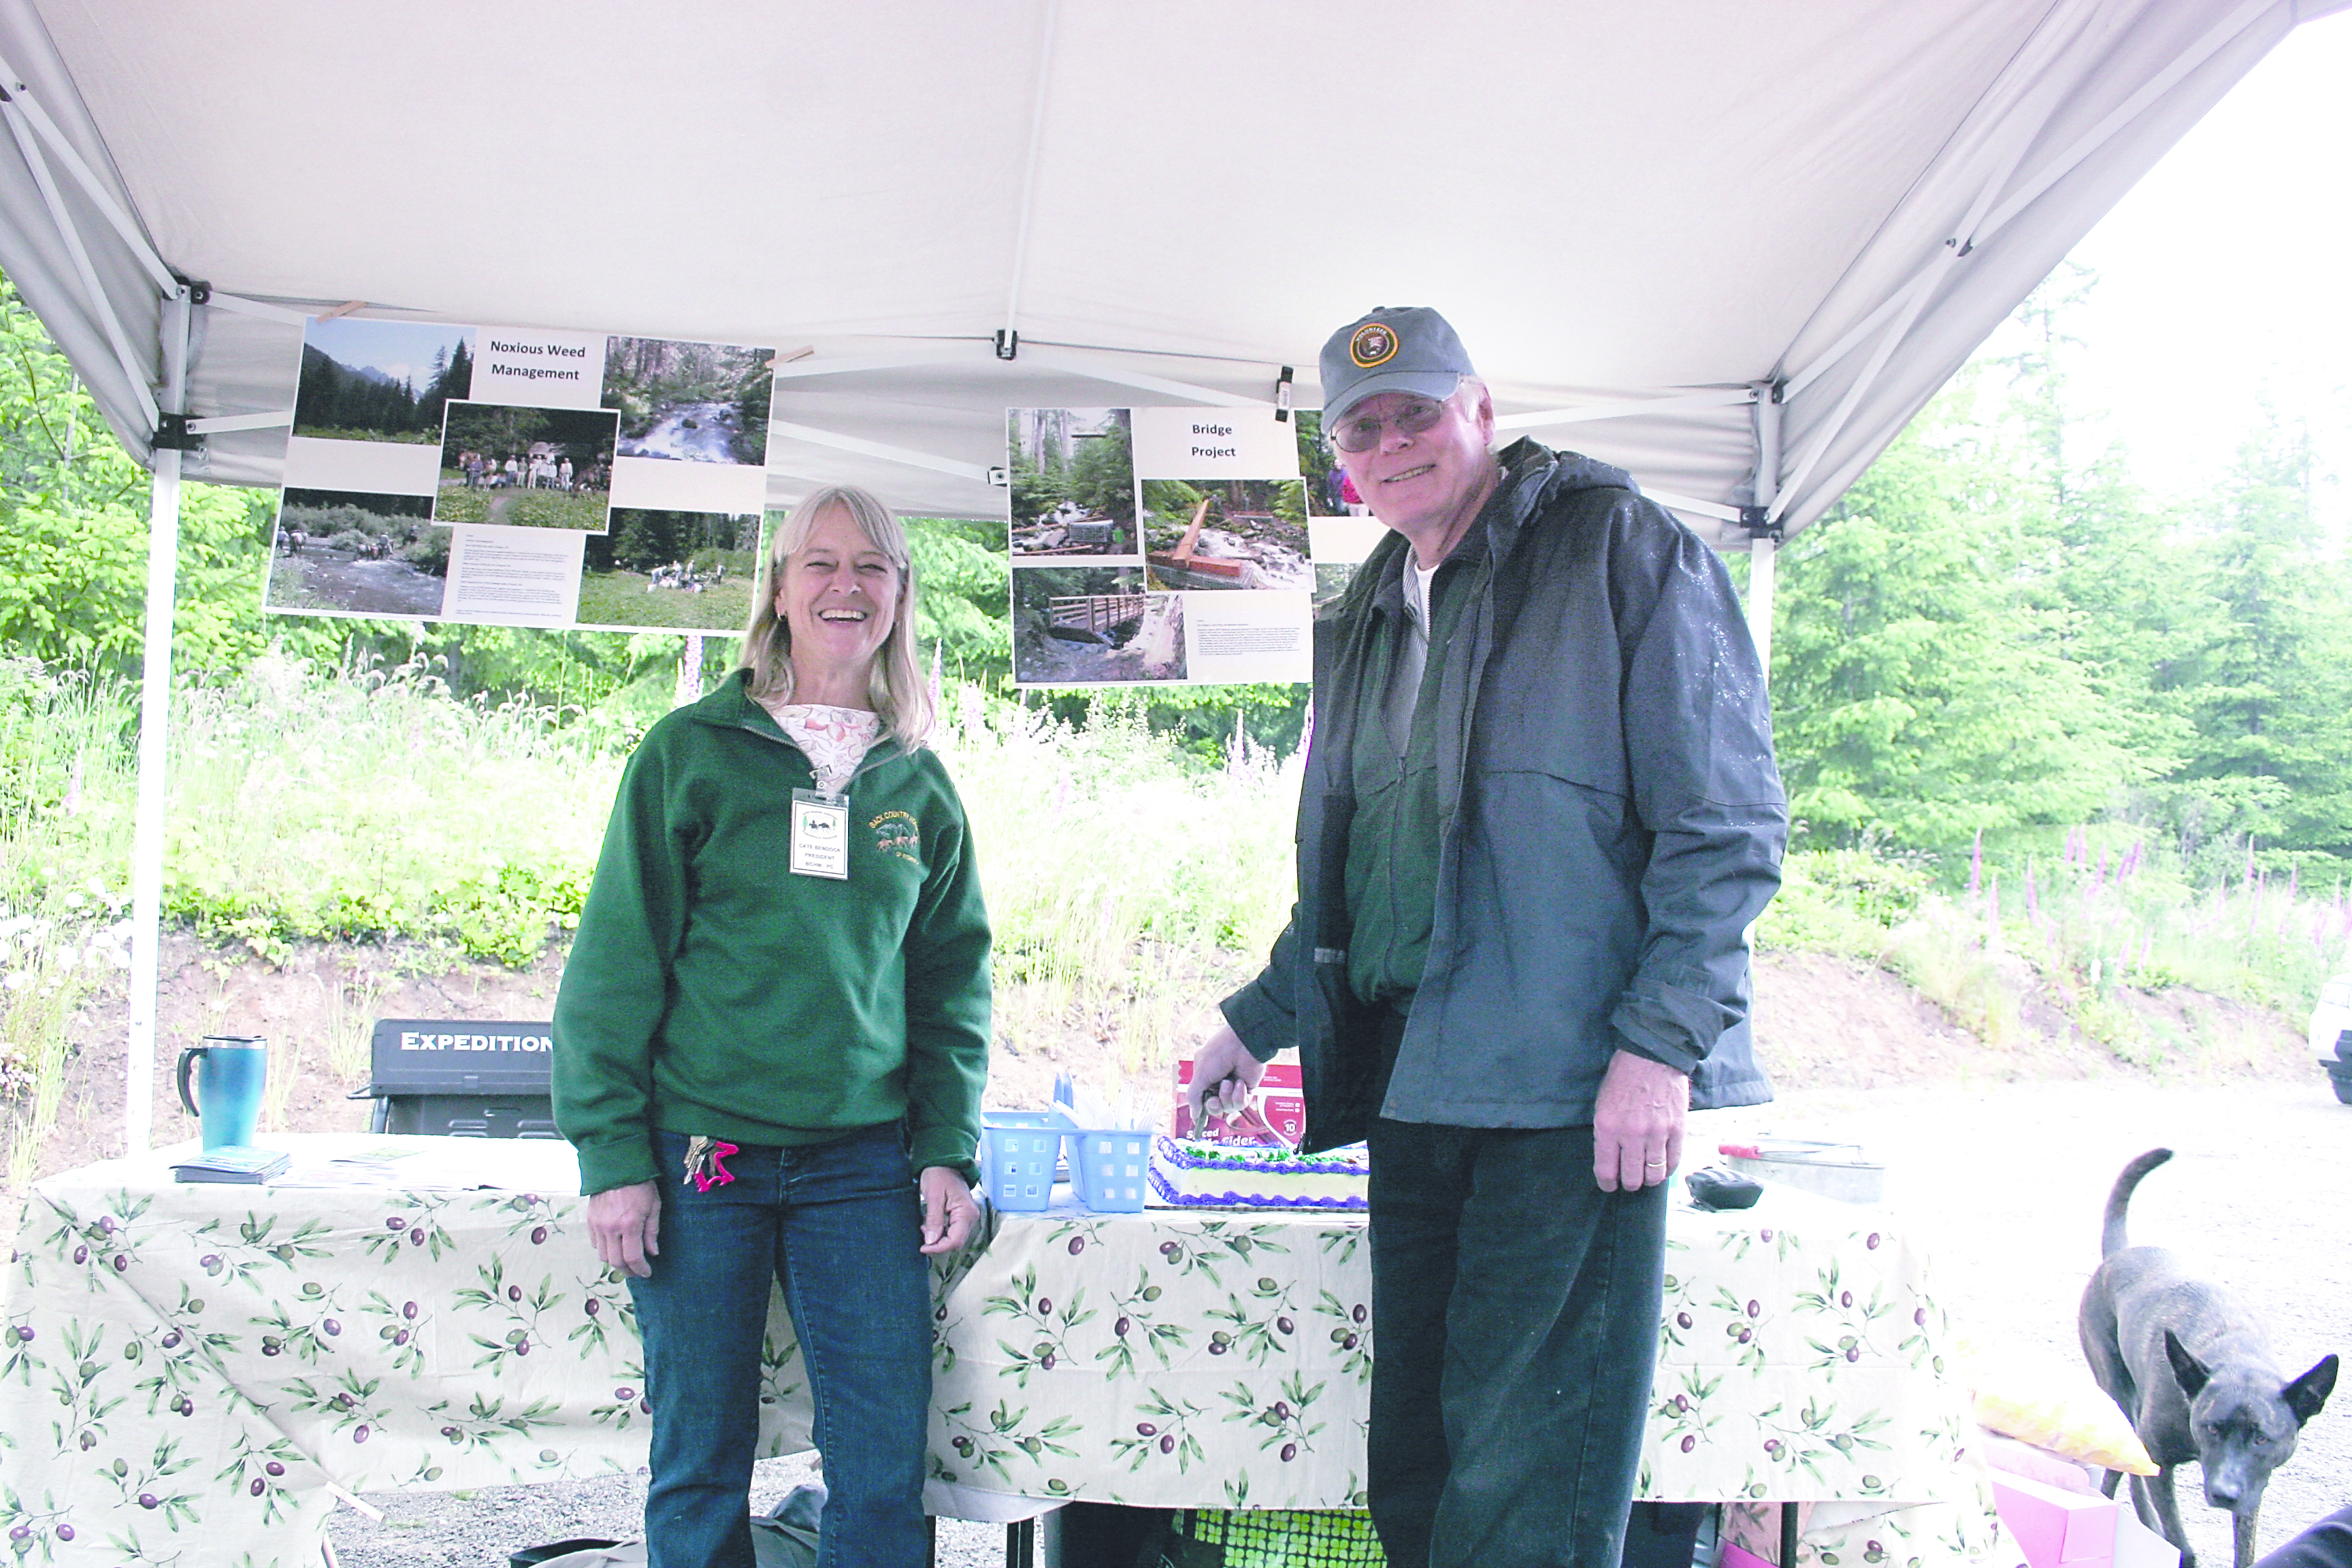 Backcountry Horsemen Peninsula Chapter's Cate Bendock and Project Manager Tom Mix cut the ceremonial cake during dedication ceremonies for the Dan Kelly Olympic Discovery Trail trailhead parking area on June 22. Karen Griffiths/For Peninsula Daily News